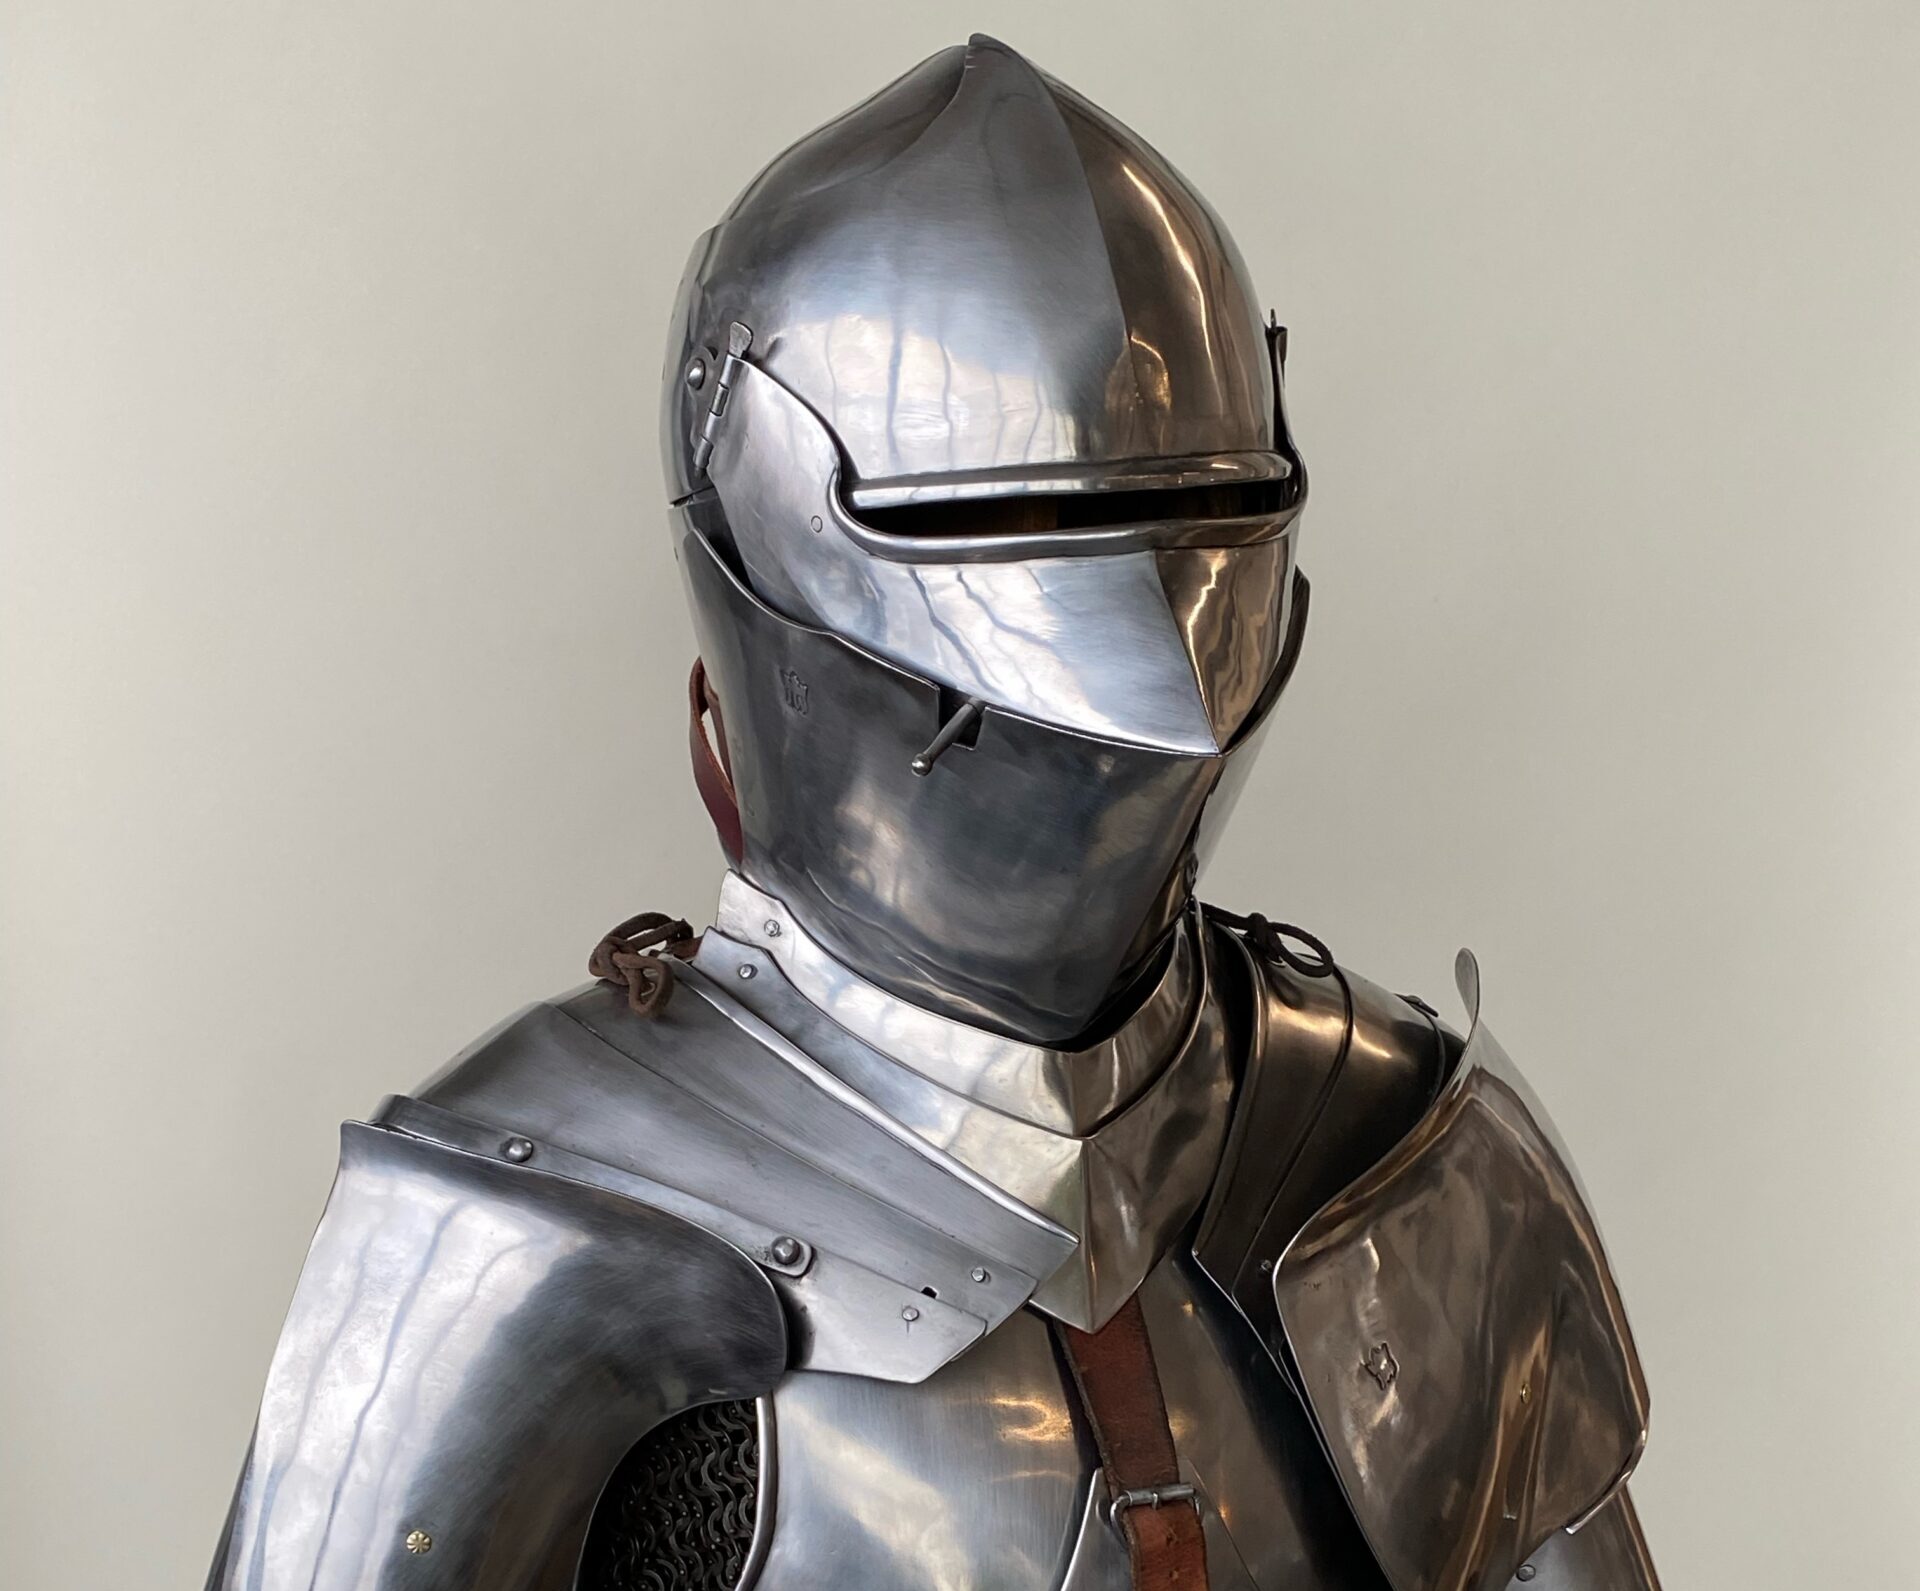 Arms and Armor exhibition at the Bruce Museum